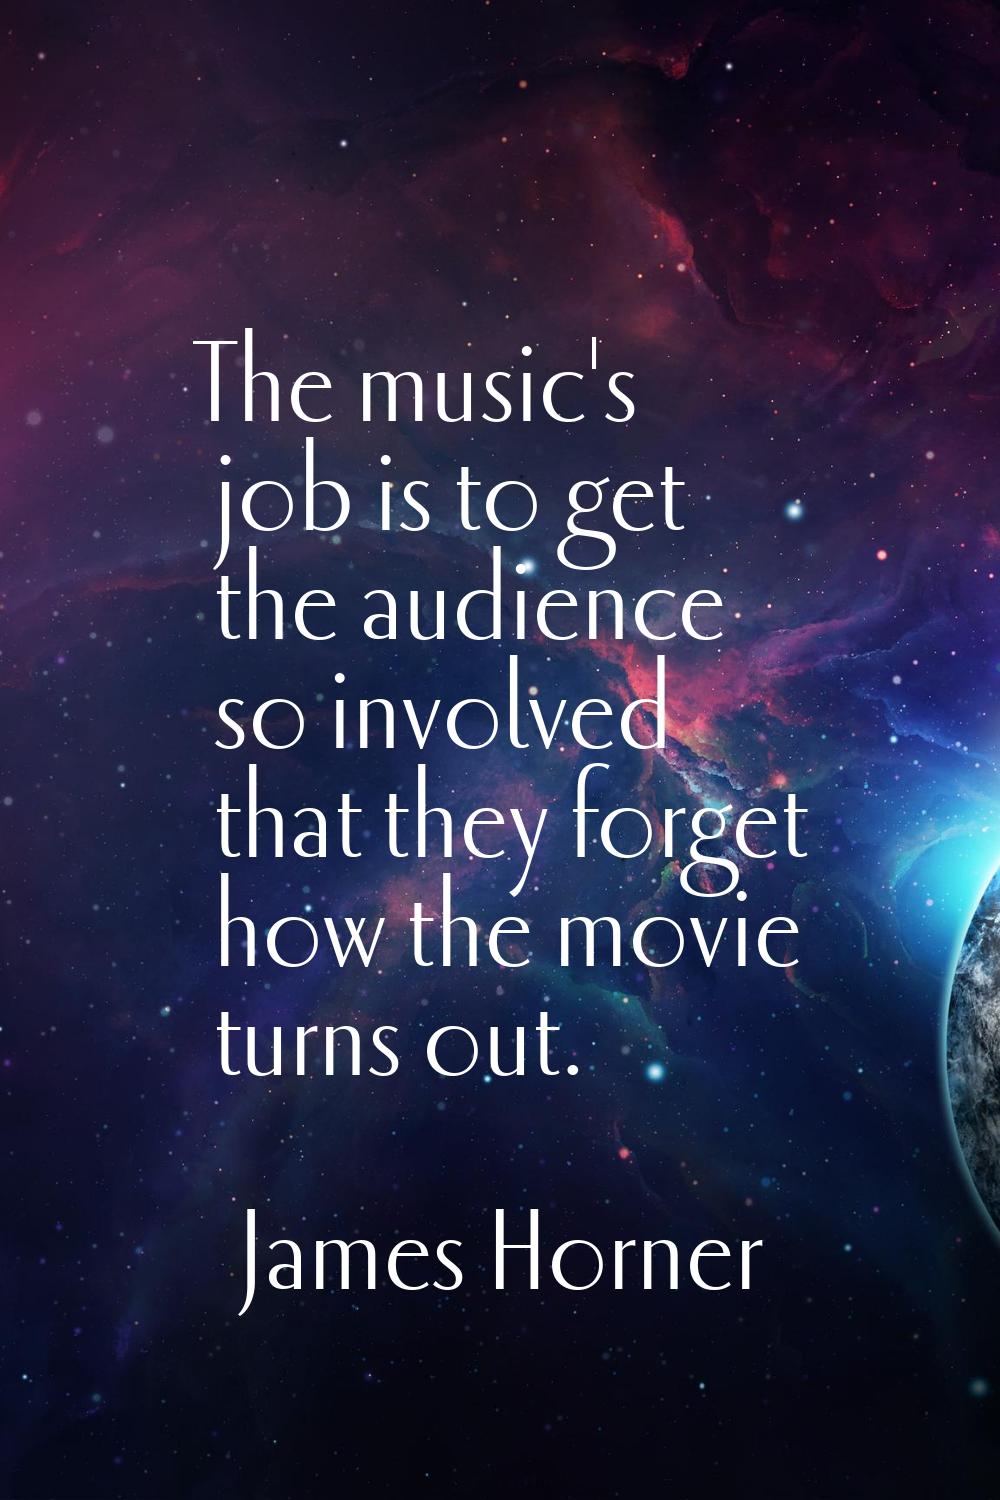 The music's job is to get the audience so involved that they forget how the movie turns out.